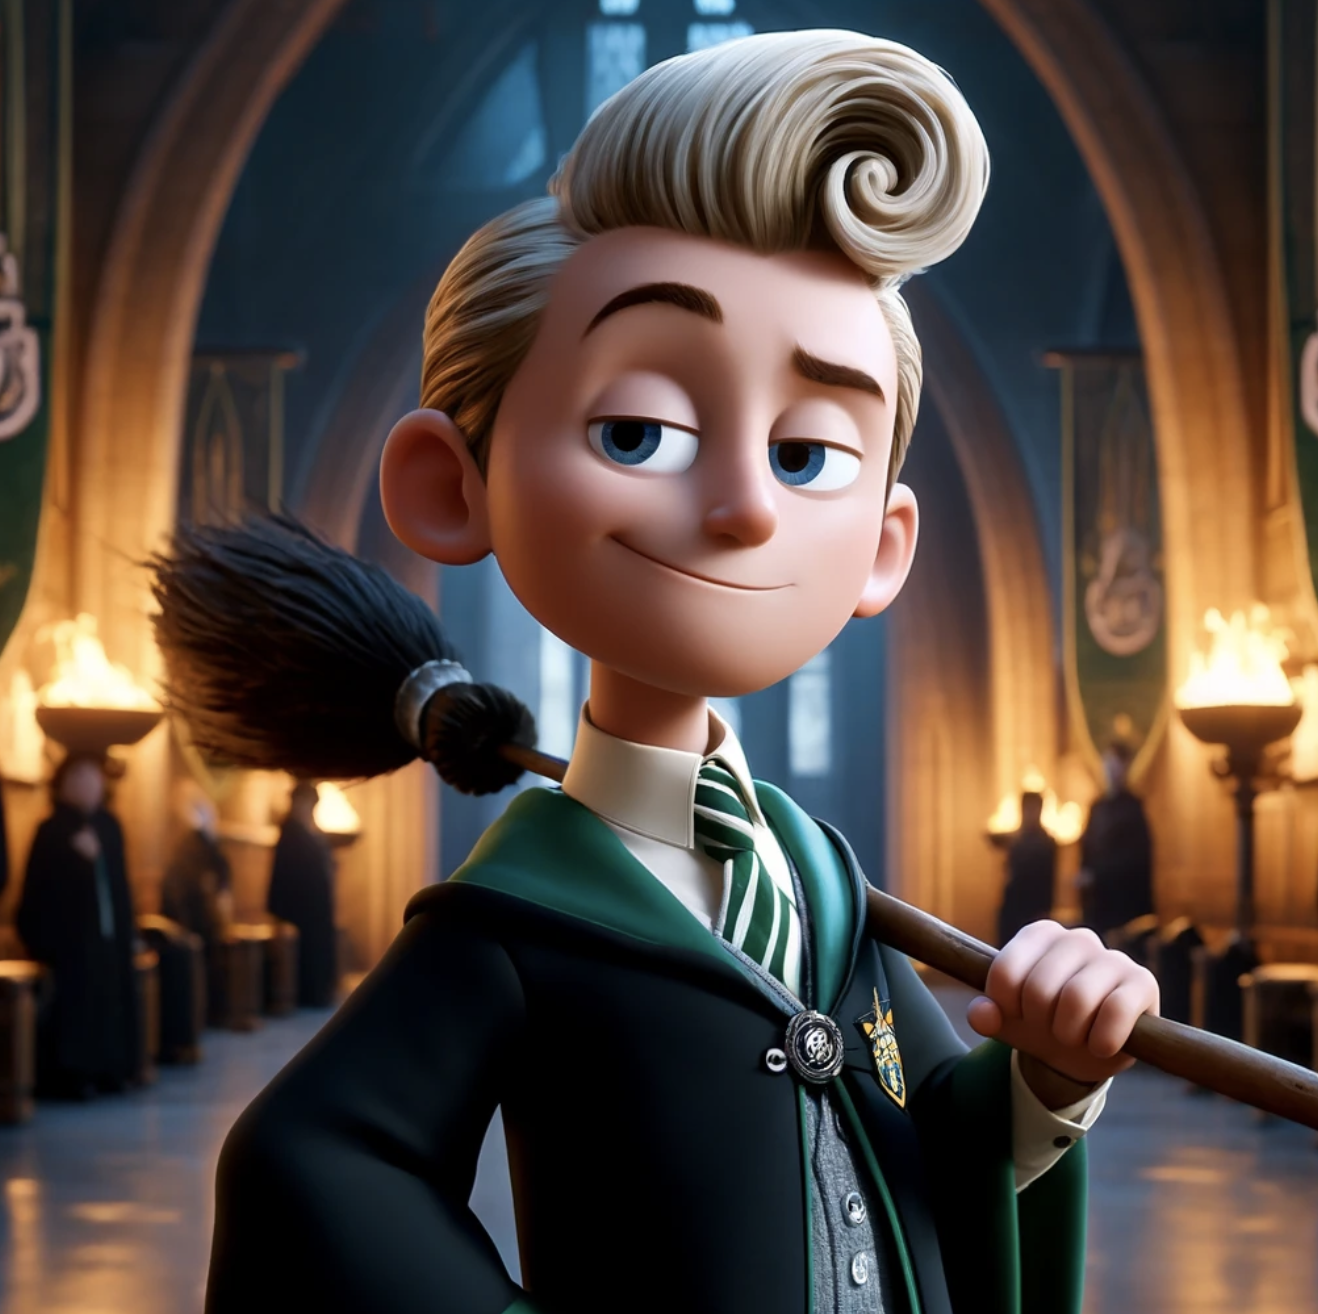 Animated character &#x27;Edgar&#x27; from the film &#x27;The Willoughbys&#x27;, holding a broom in an ornate room